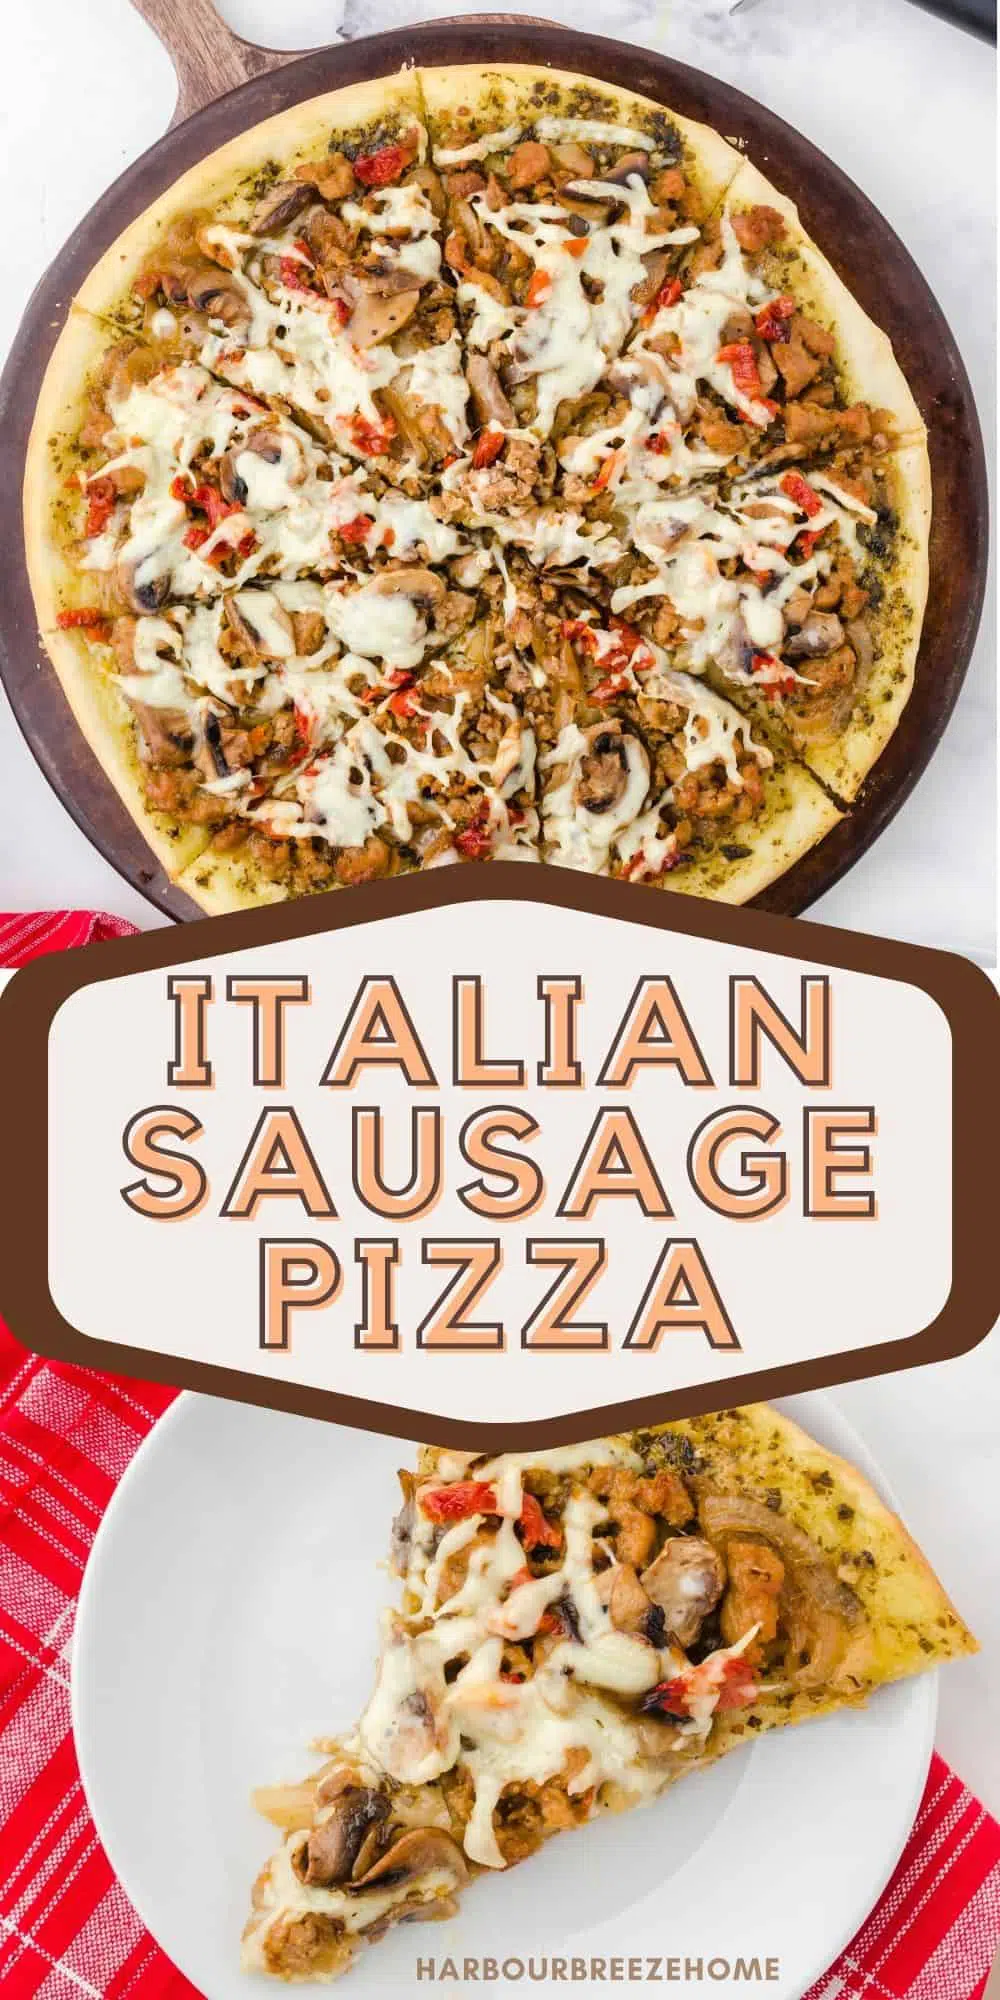 Italian sausage pizza on a pizza stone with the text "Italian Sausage Pizza" on it.